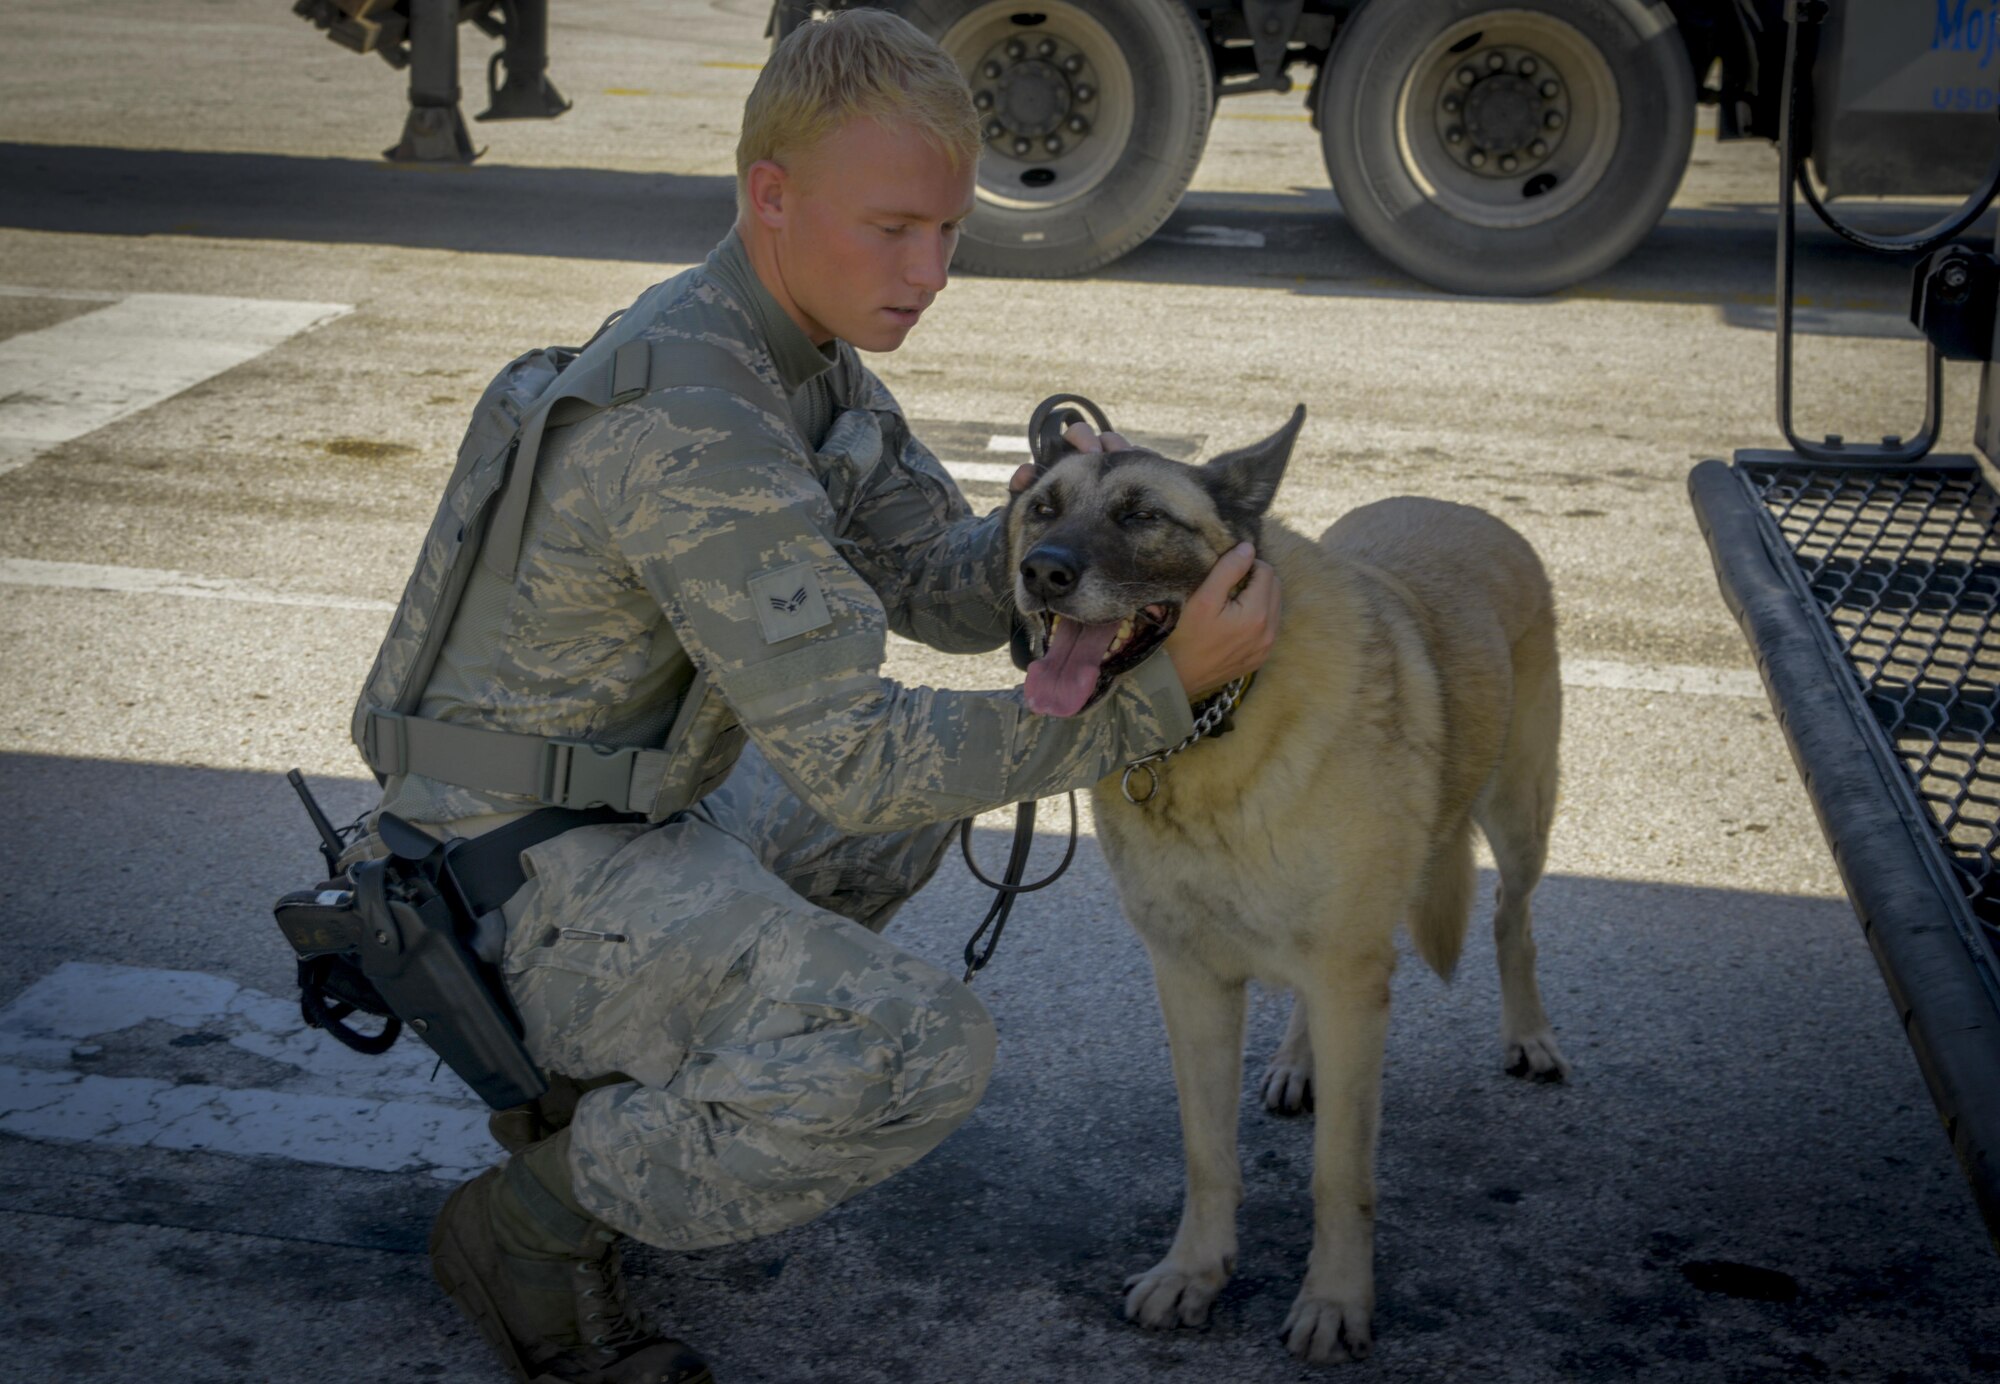 U.S. Air Force Senior Airman Brian Loughmiller, a military working dog handler assigned to the 6th Security Forces Squadron, takes a break to comfort his partner Jecky, a military working dog, at MacDill Air Force Base, Fla., Aug. 15, 2017. The dog and its handler develop a bond after working so many long hours together. (U.S. Air Force photo by Senior Airman Mariette Adams)